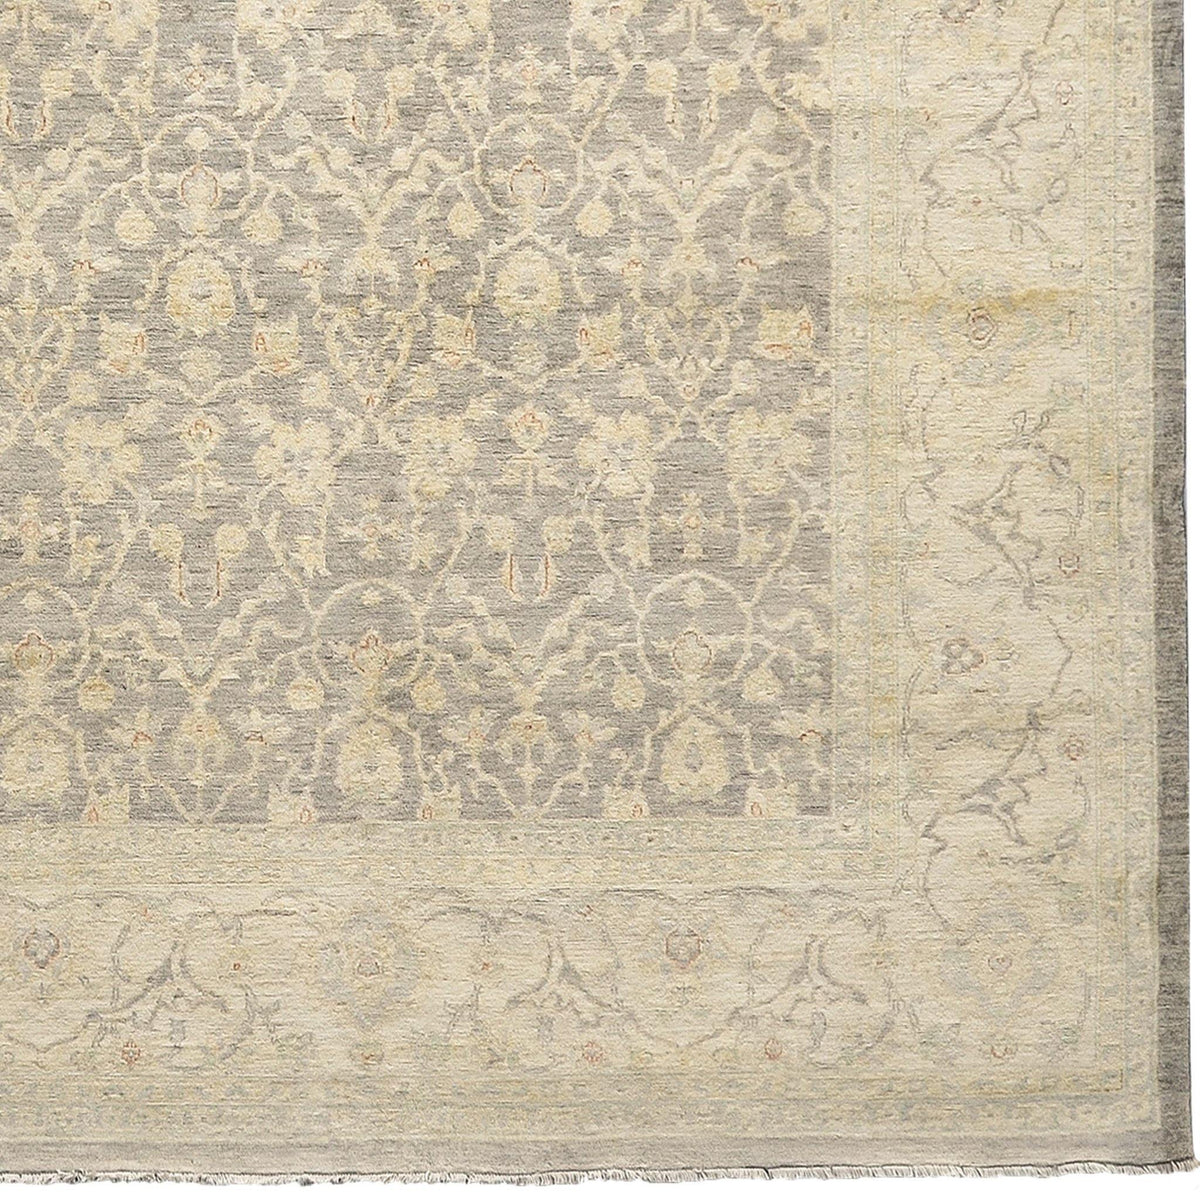 Hand-knotted Colour Reform Wool Rug 245cm x 293cm